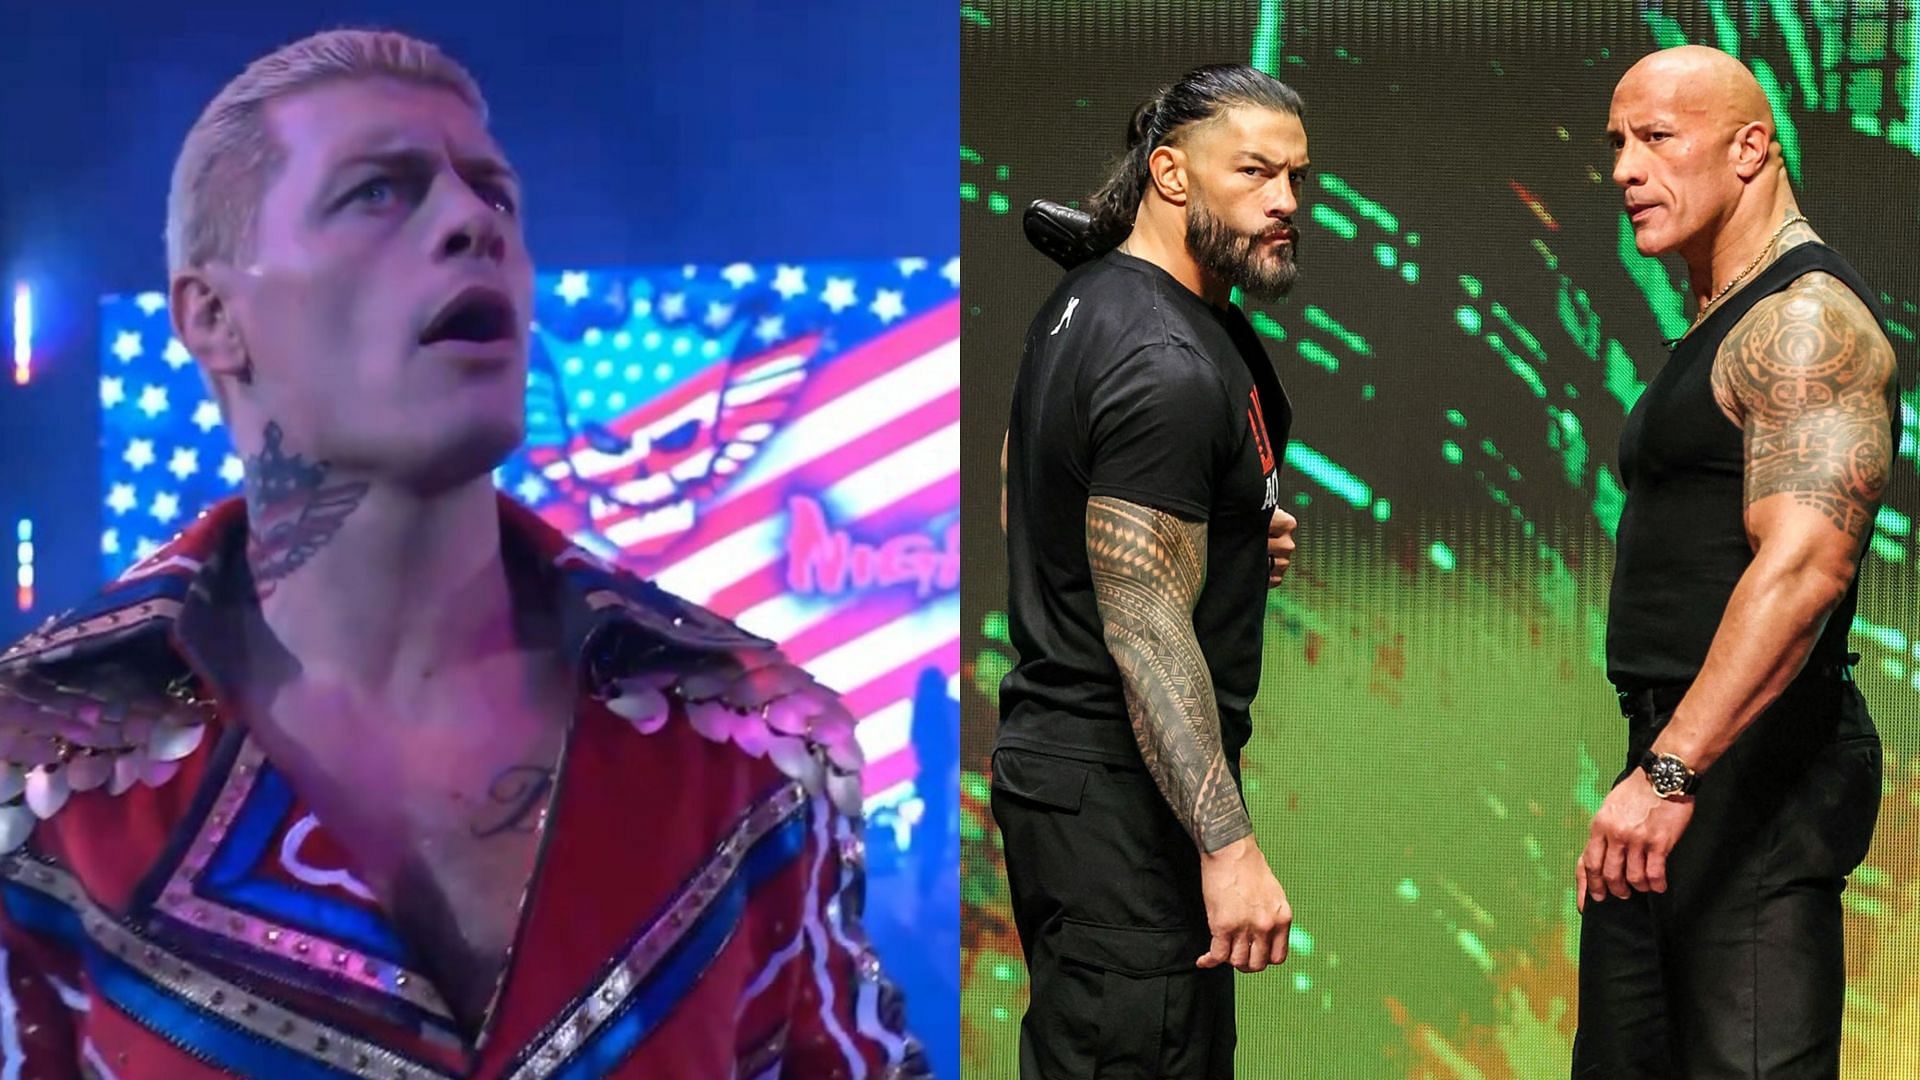 Cody Rhodes will face Roman Reigns at WWE WrestleMania 40